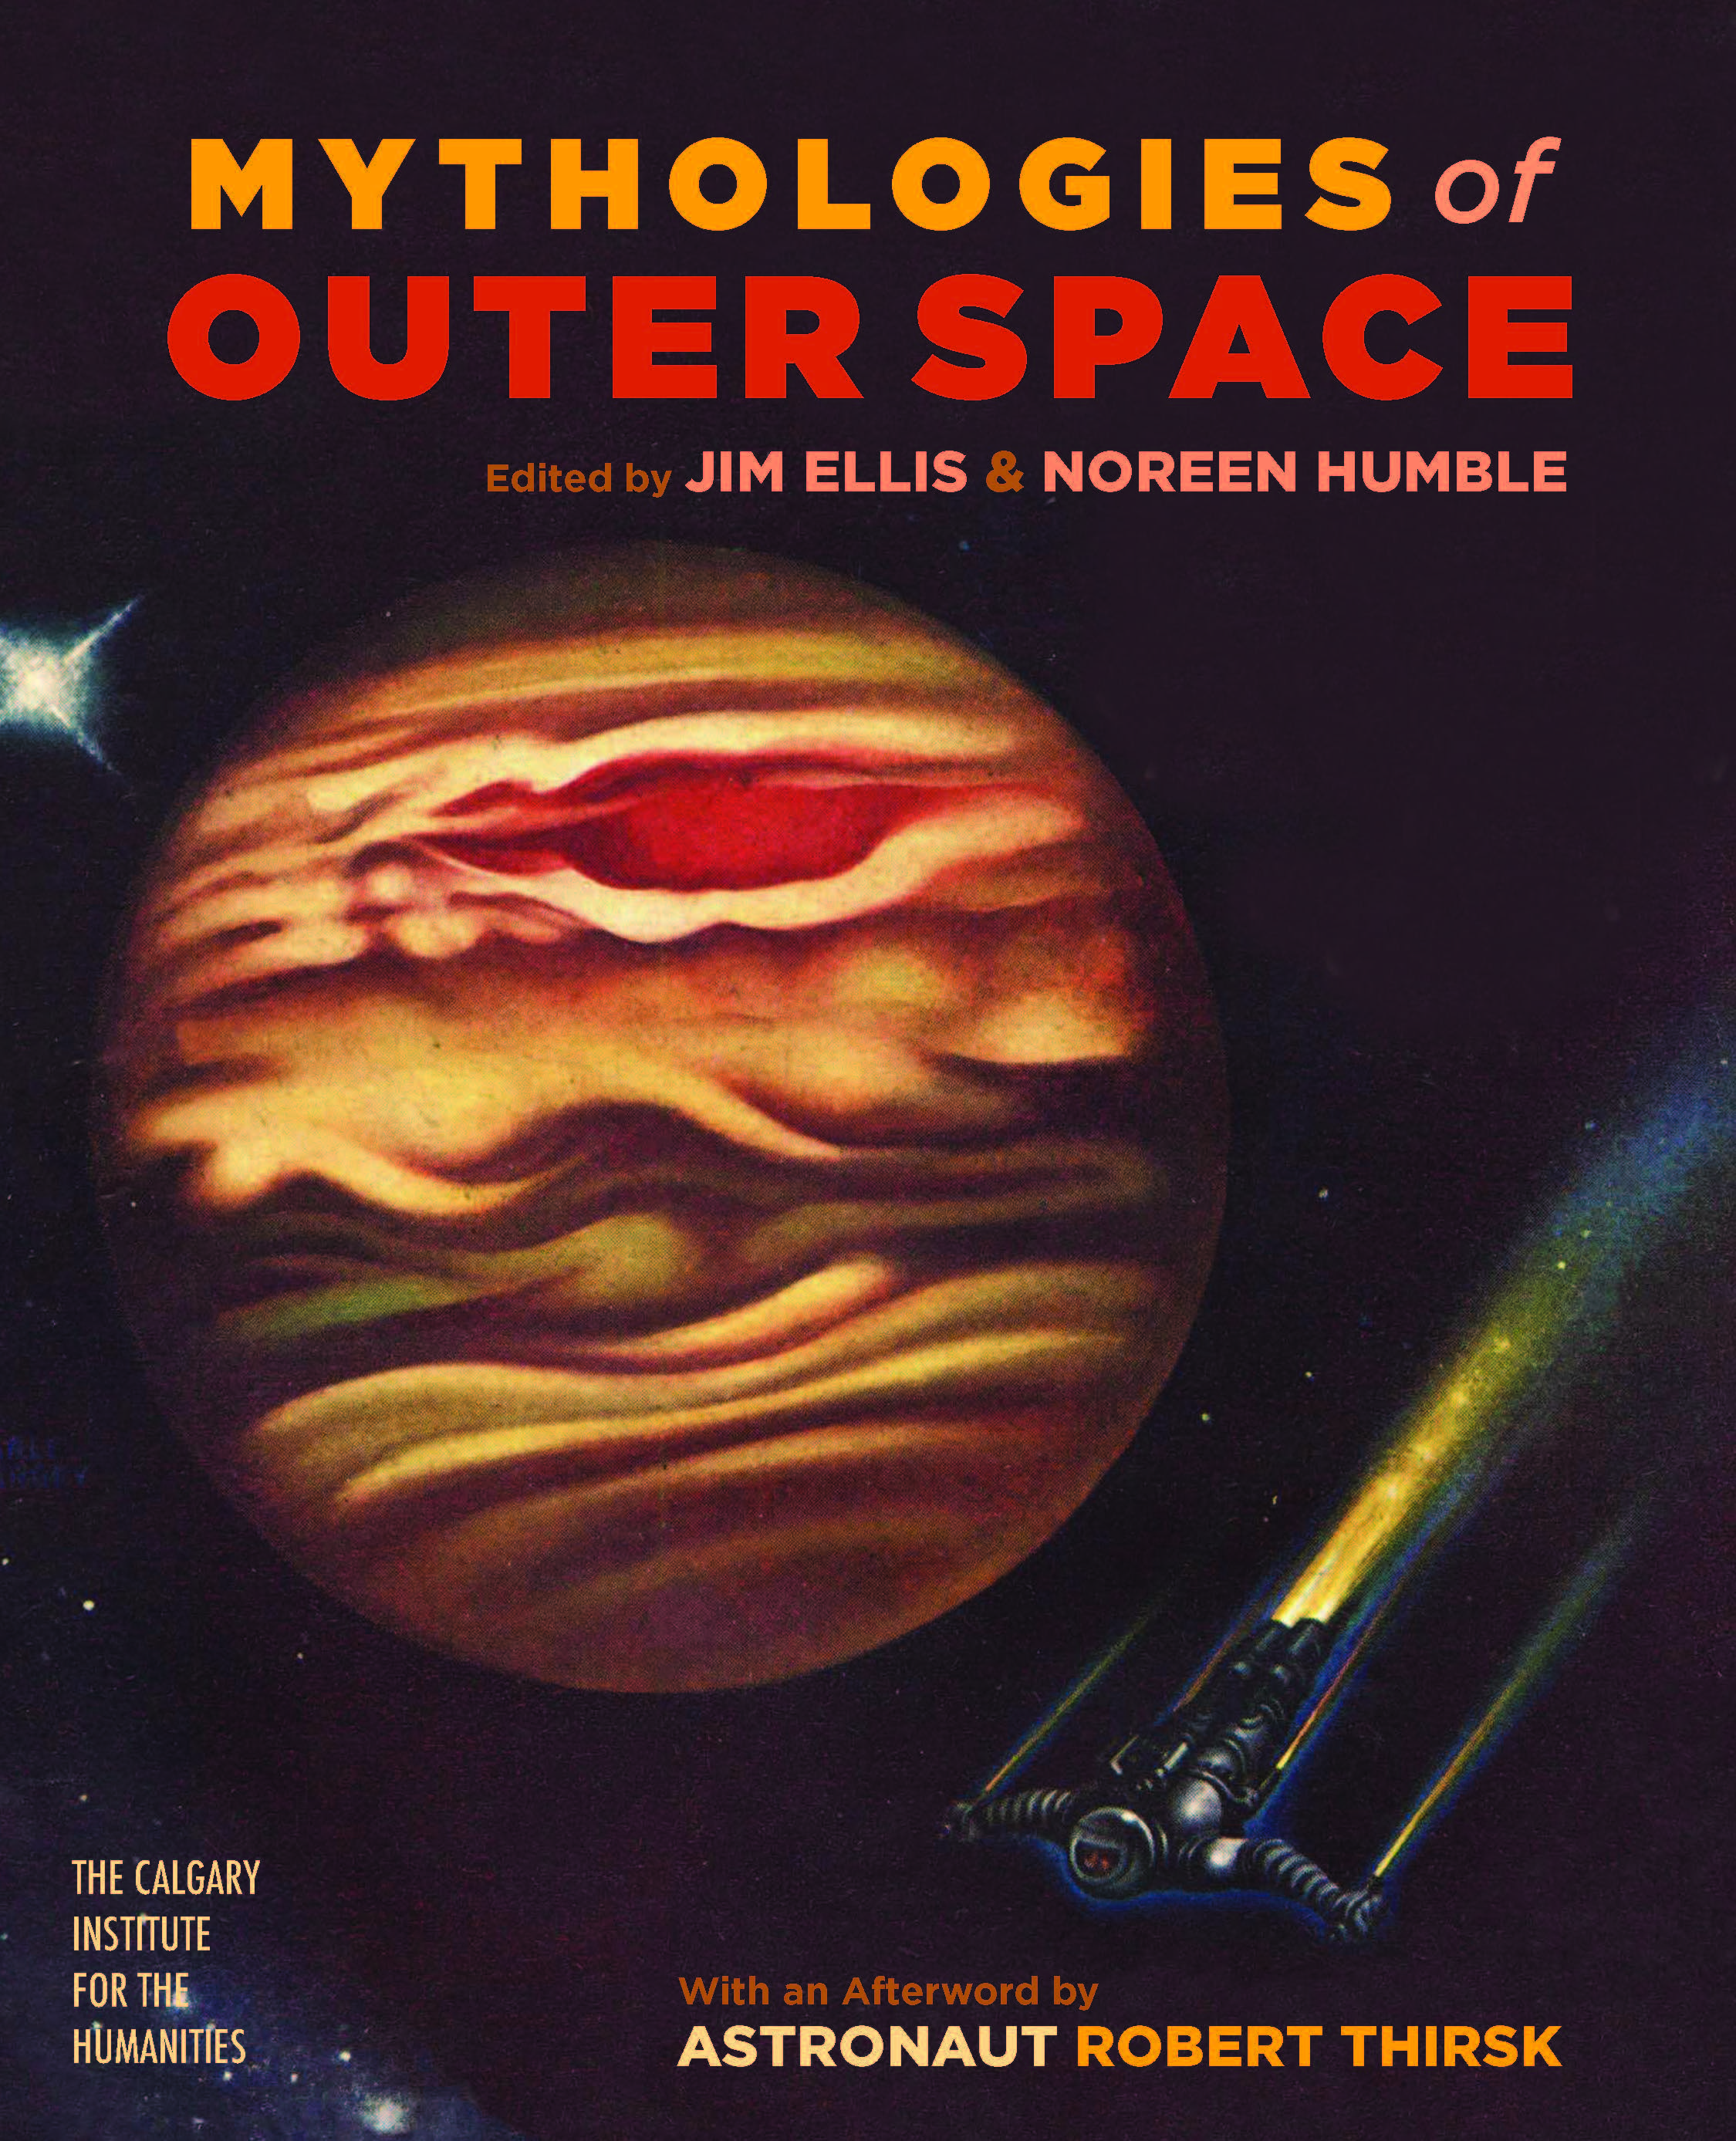 Book Cover Image for: Mythologies of Outer Space